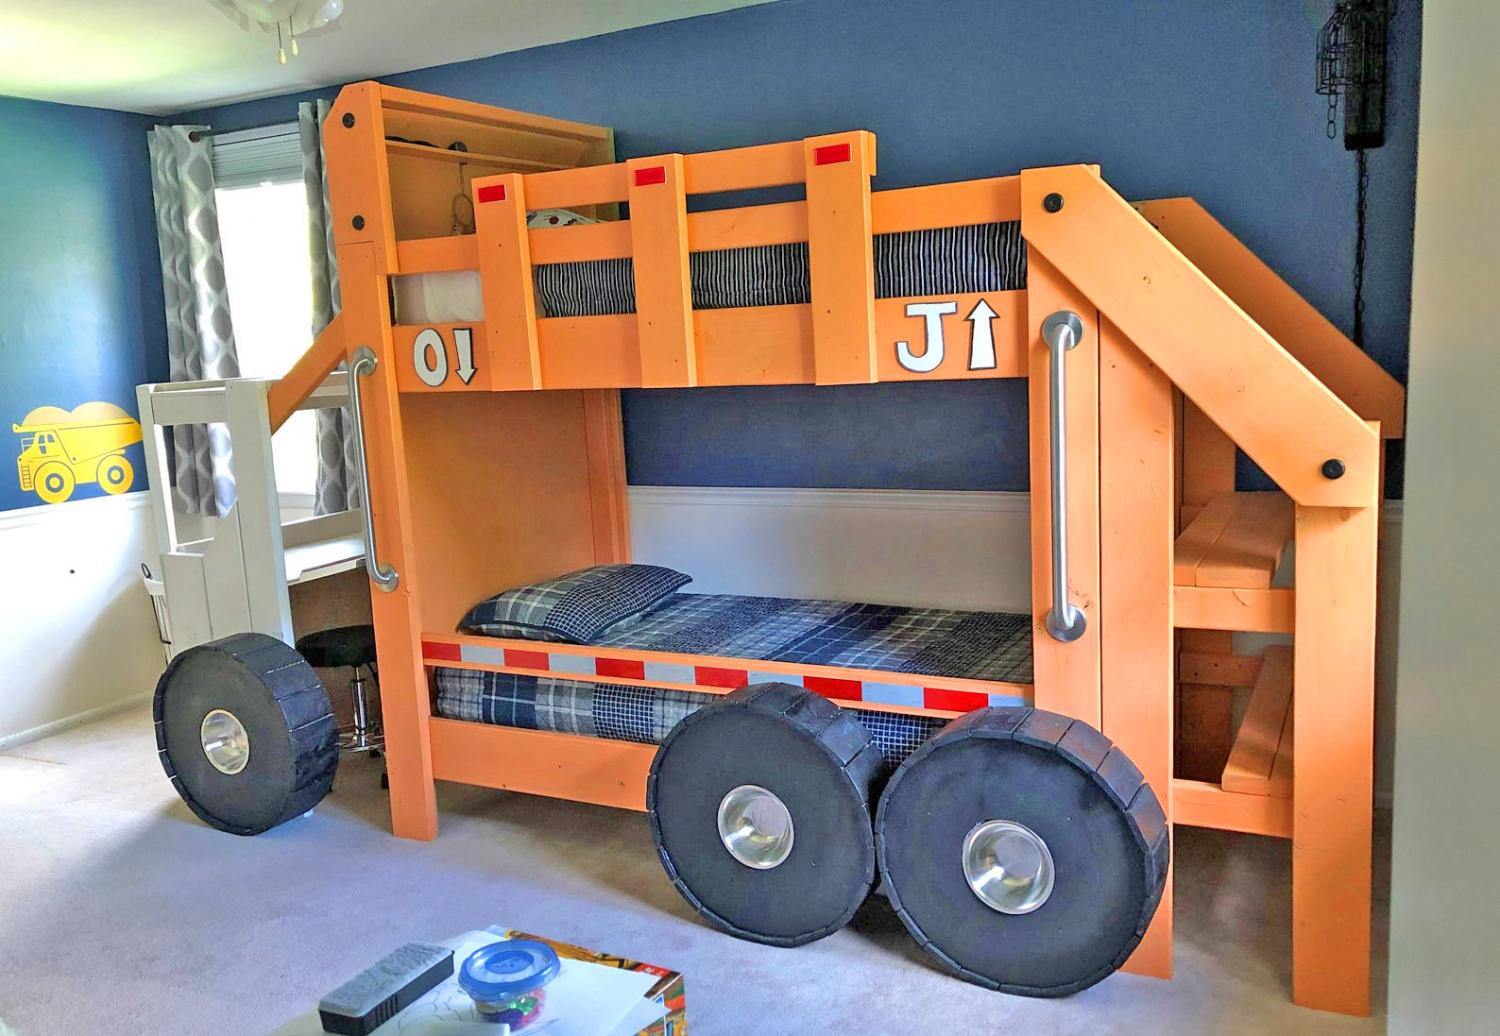 DIY Garbage Truck Bunk Bed - Garbage truck kids bed with desk and bookshelf